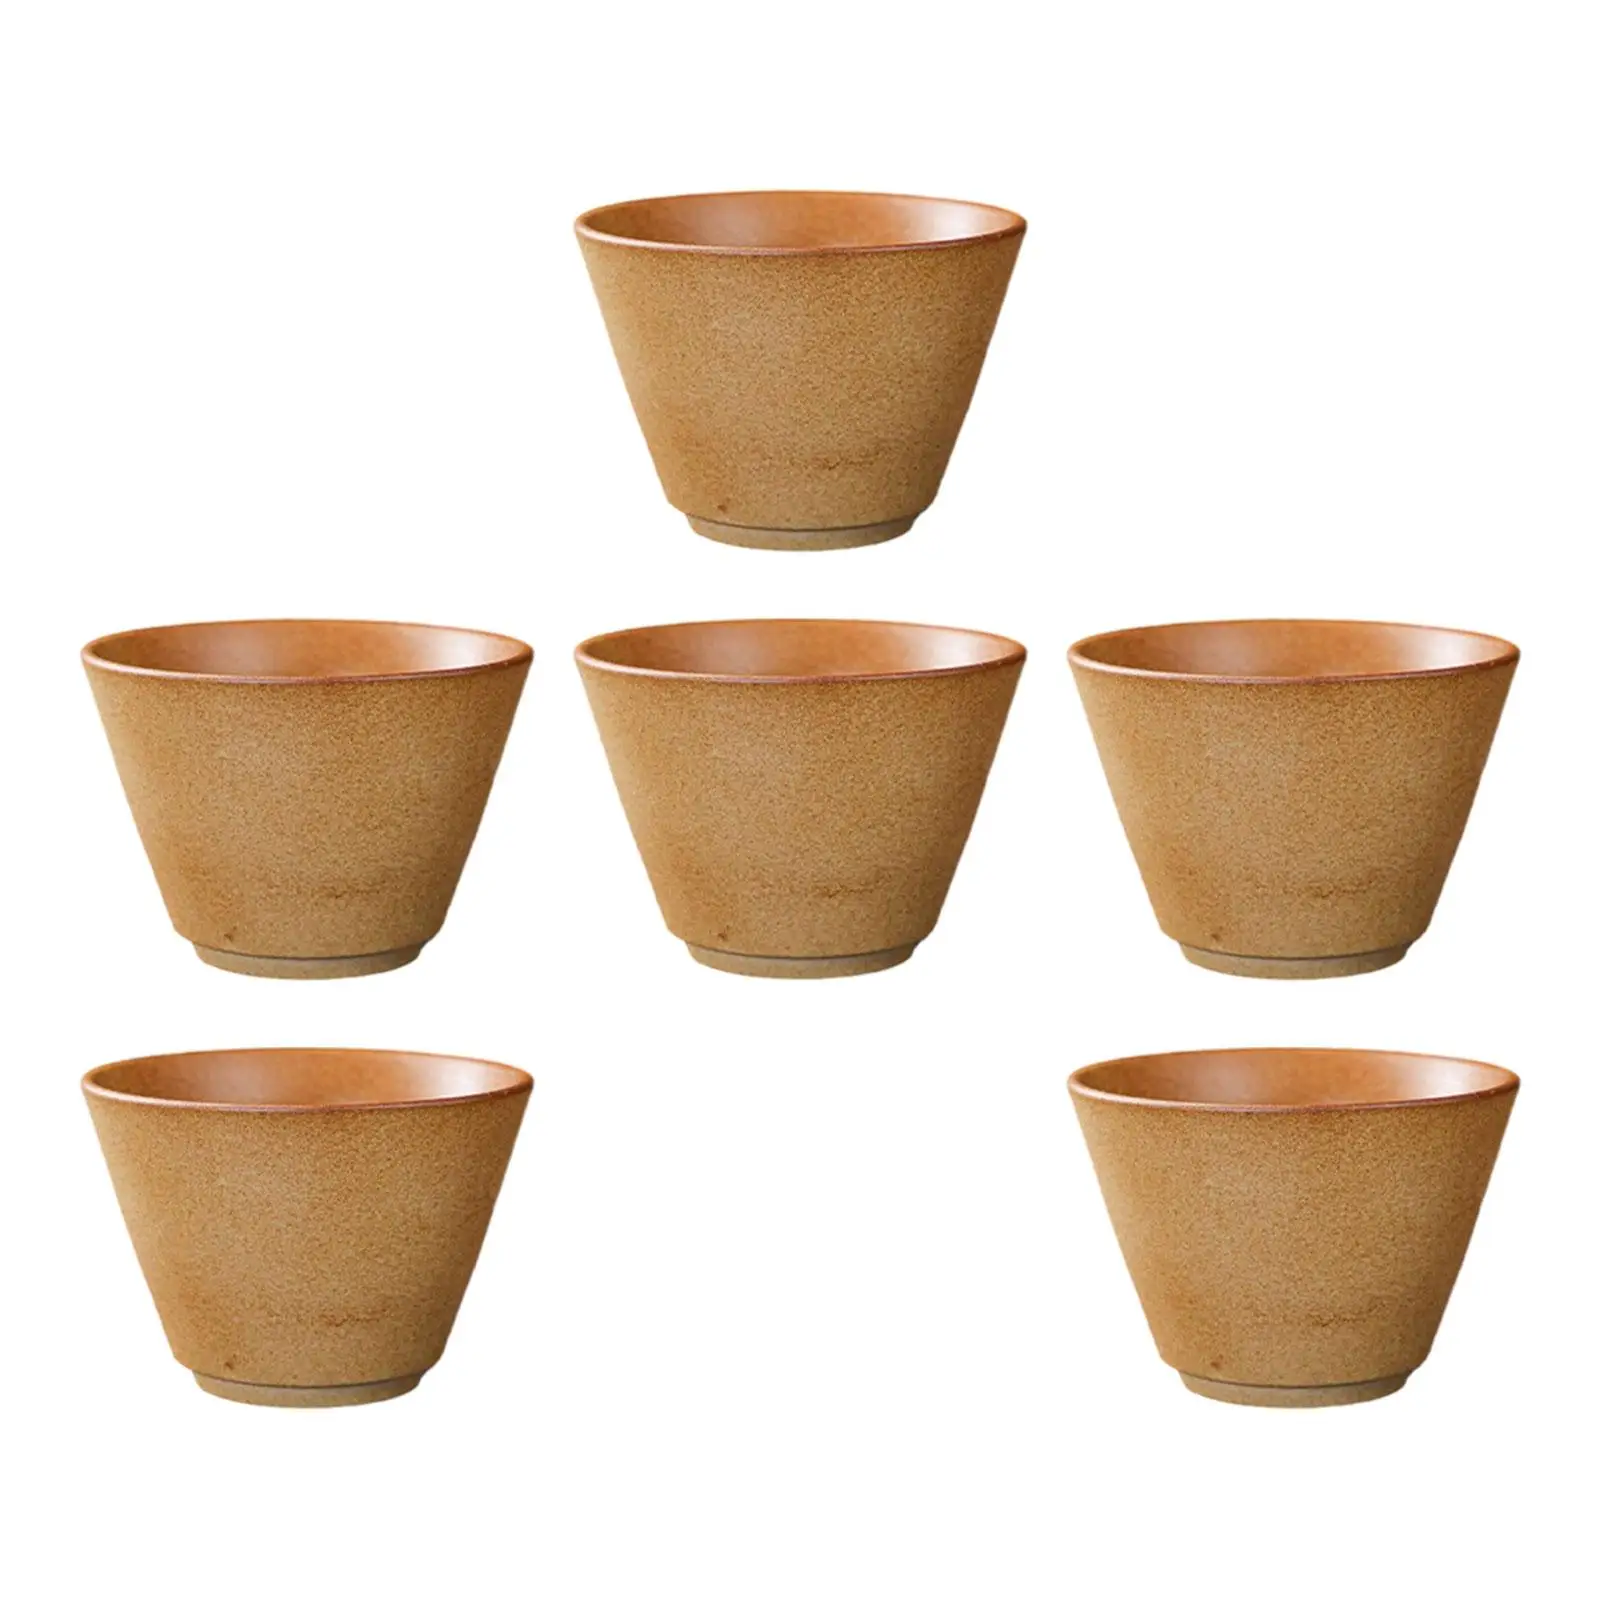 6 Pieces Chinese Porcelain Tea Cup Traditional Handmade Sake Cups Mug for Home Travel Office Tea Ceremony Party Adults Men Women